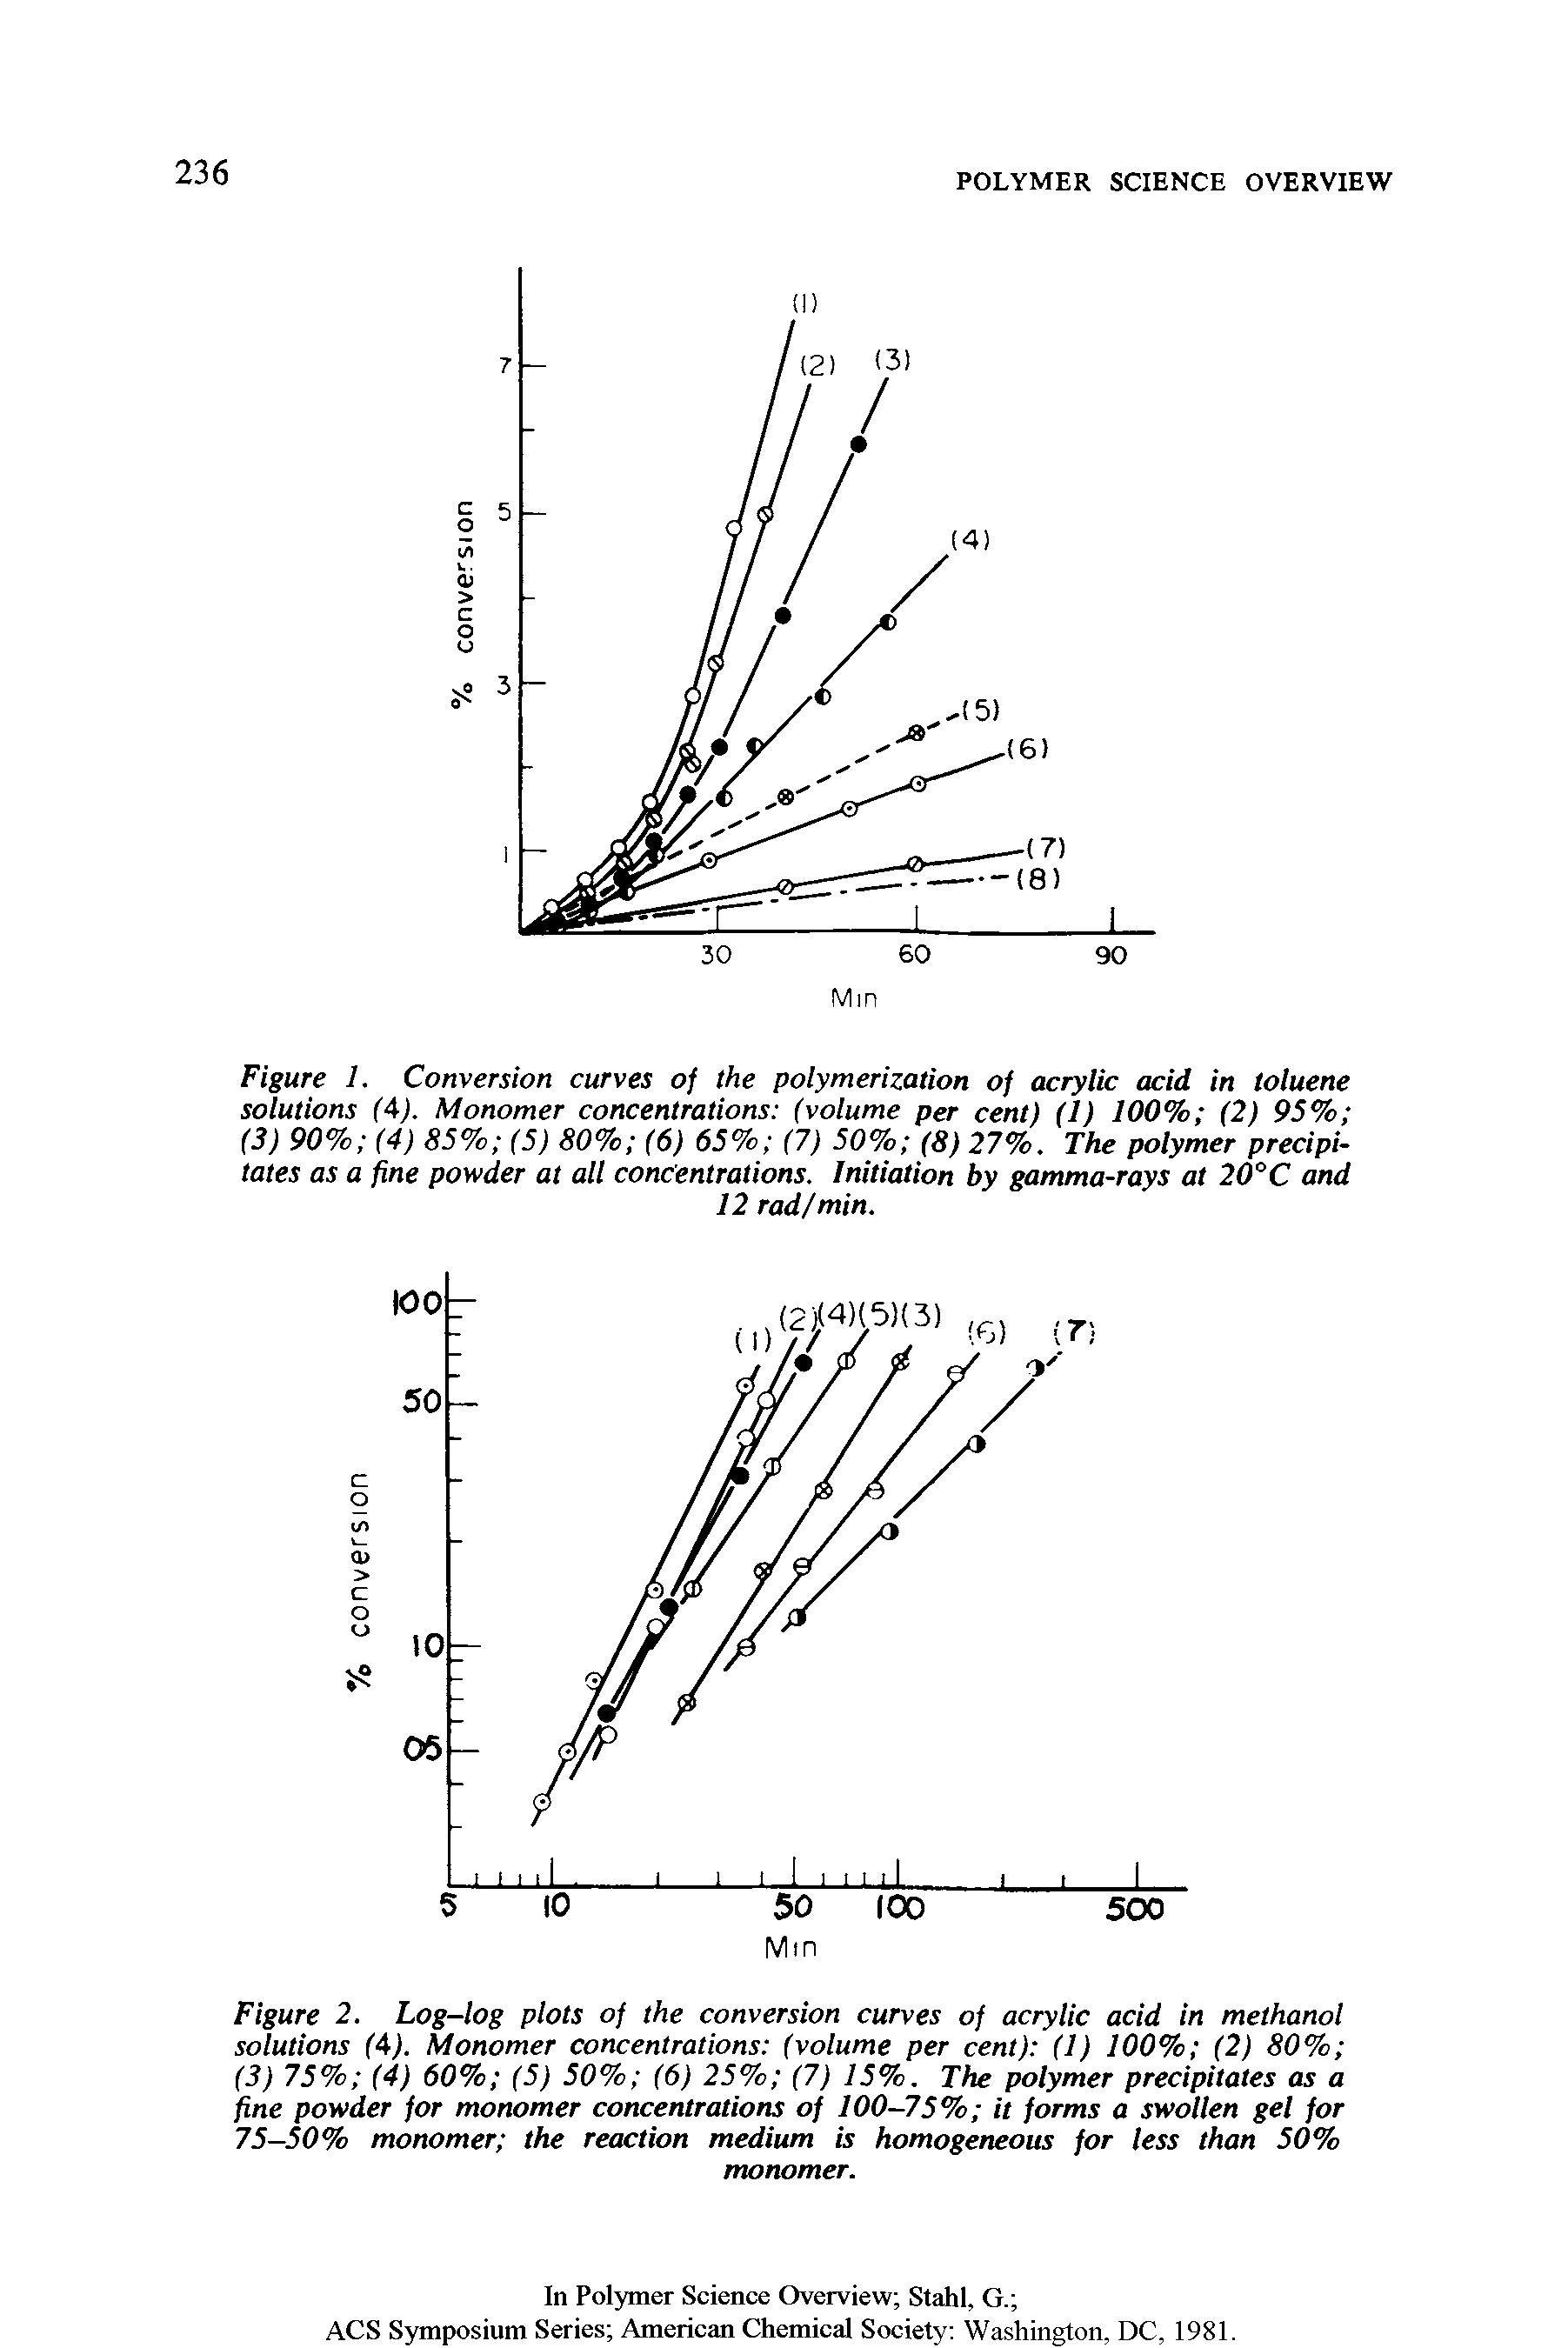 Figure 1. Conversion curves of the polymerization of acrylic acid in toluene solutions (4). Monomer concentrations (volume per cent) (1) 100% (2) 95% (3) 90% (4) 85% (5) 80% (6) 65% (7) 50% (8) 27%. The polymer precipitates as a fine powder at all concentrations. Initiation by gamma-rays at 20°C and...